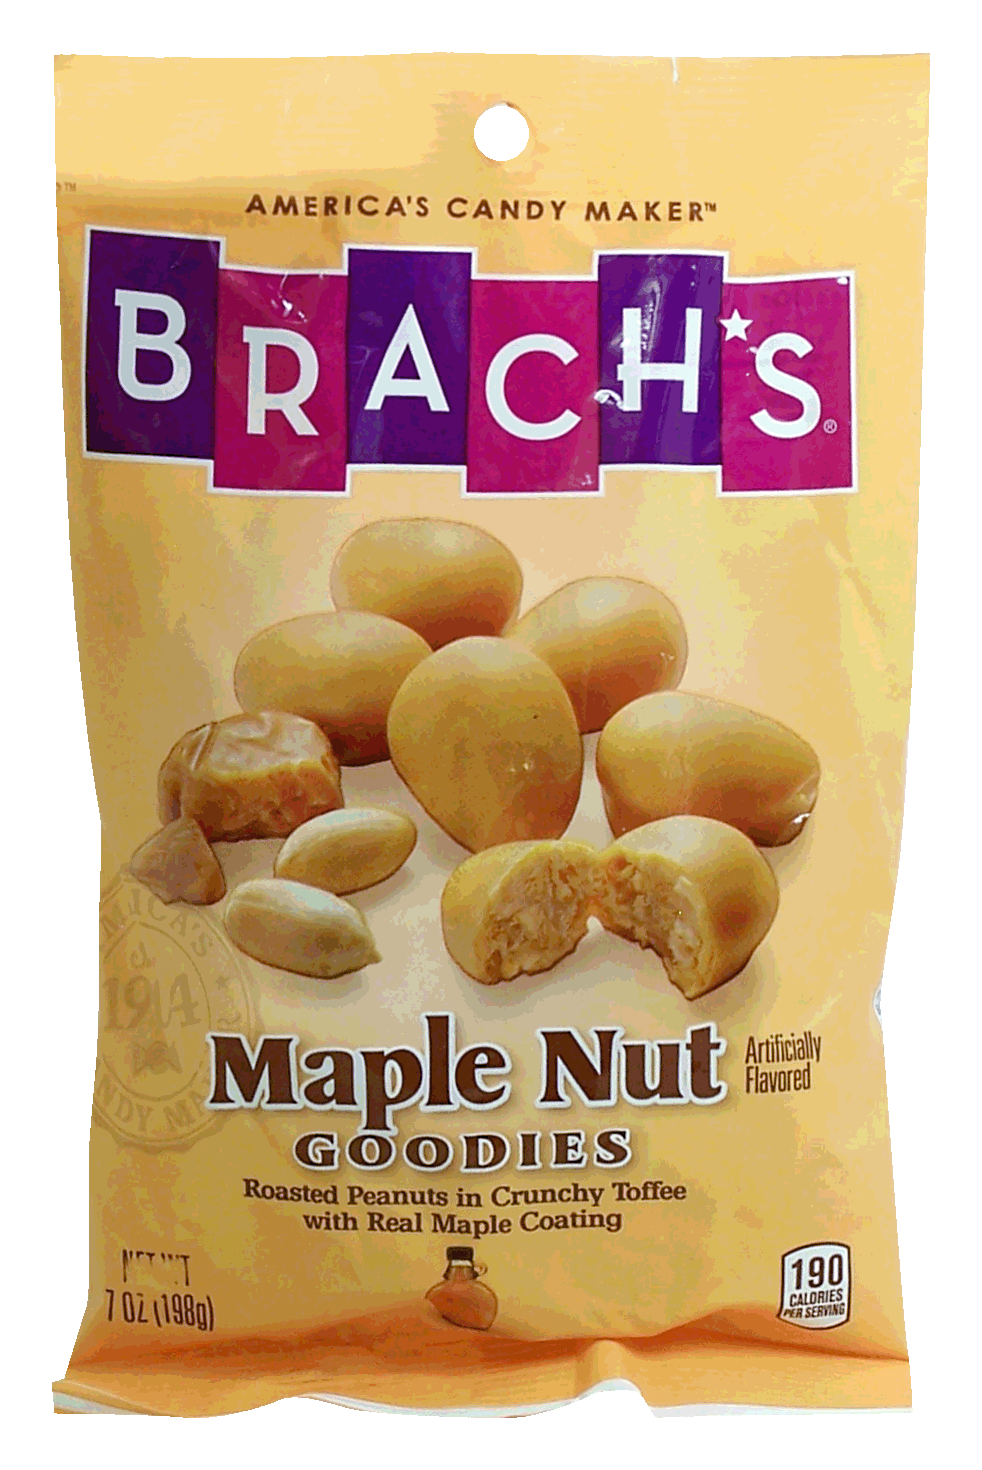 Brach's Maple Nut Goodies peanuts in crunchy toffee with maple coating Full-Size Picture